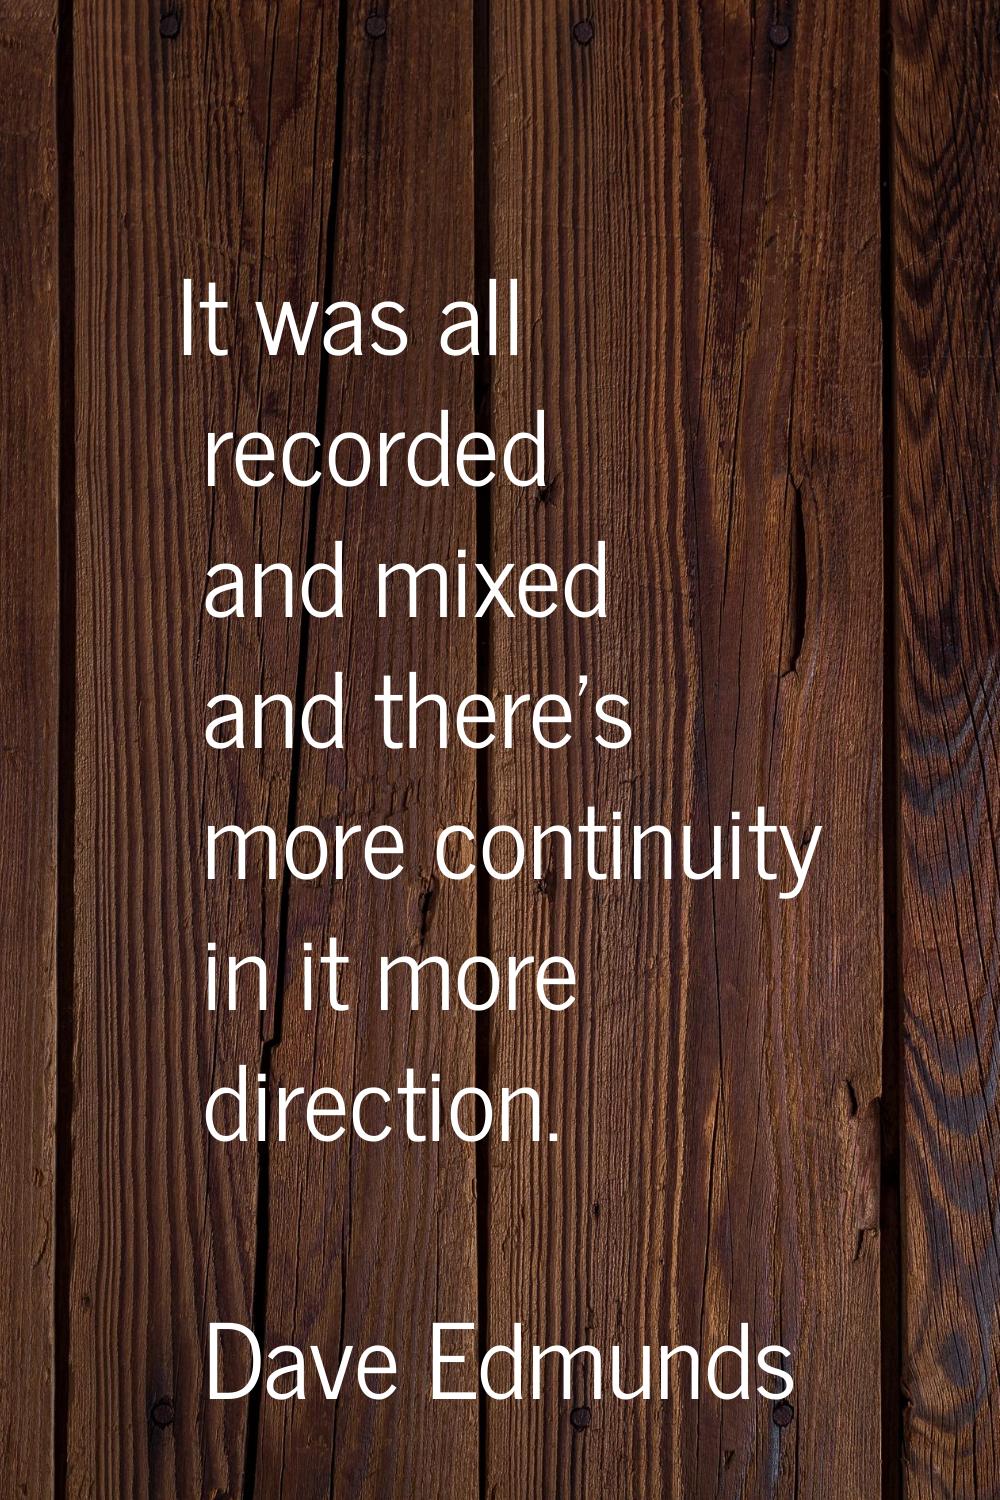 It was all recorded and mixed and there's more continuity in it more direction.